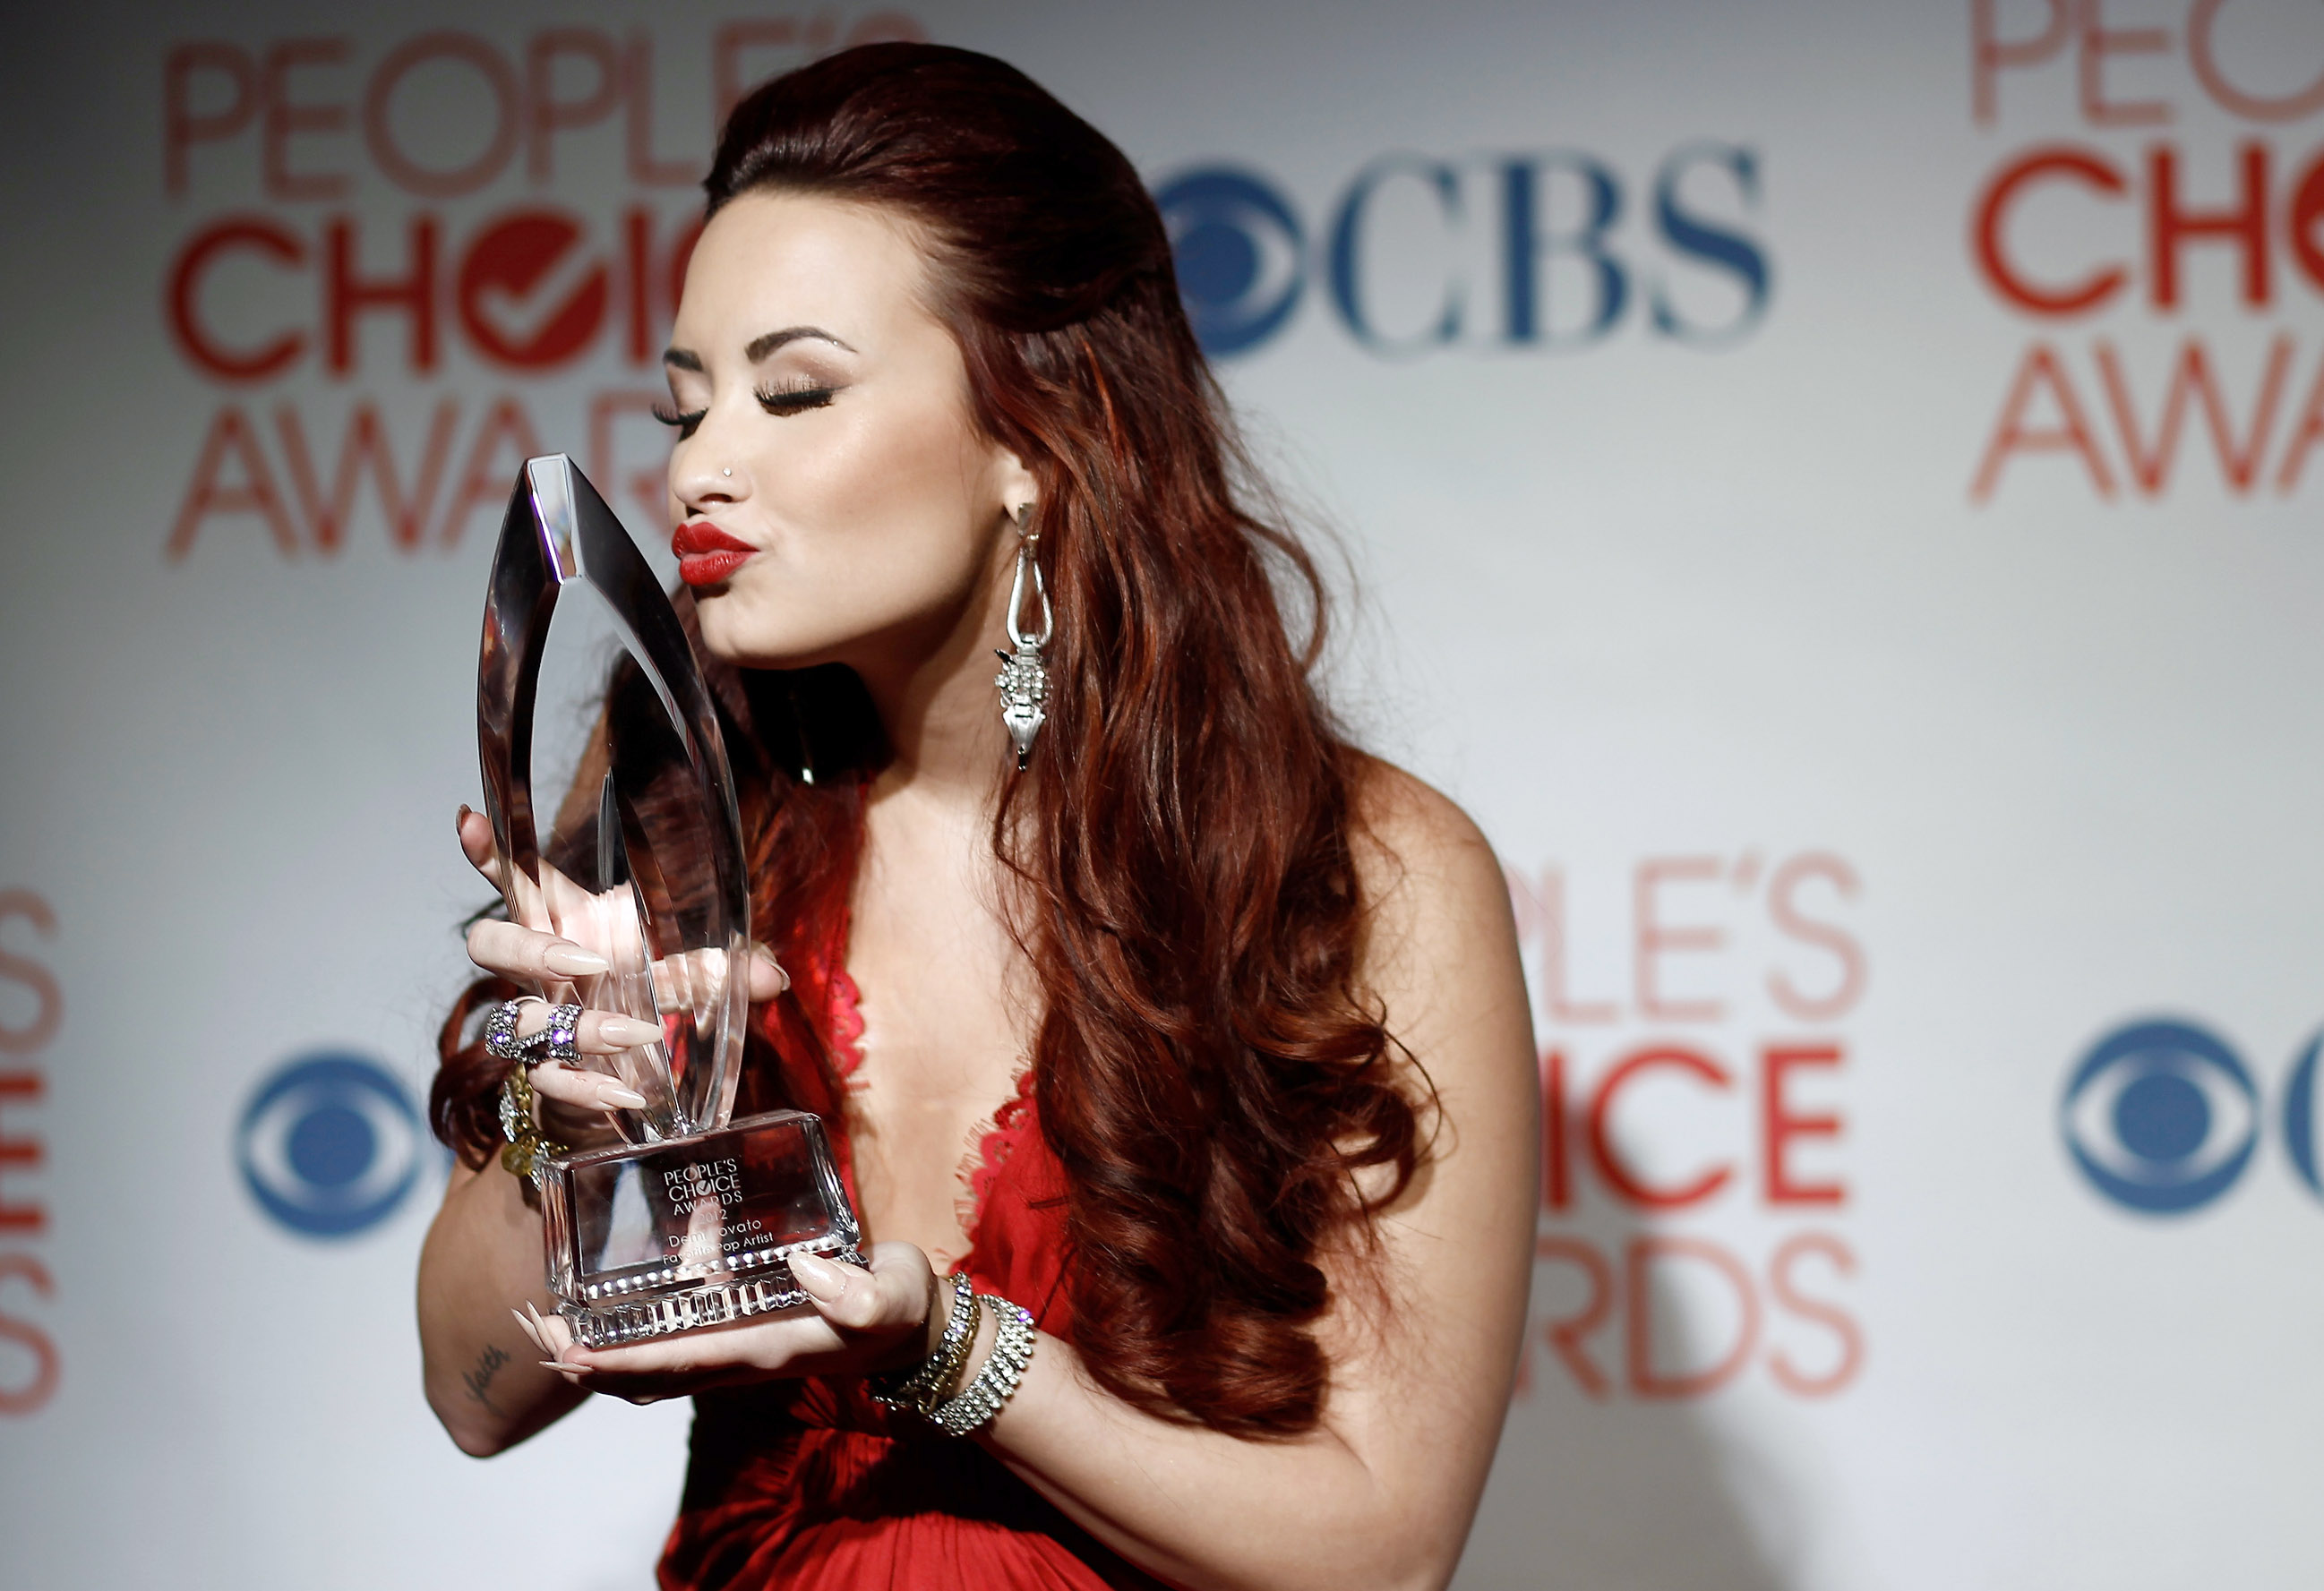 Demi Lovato in People's Choice Awards 2012 